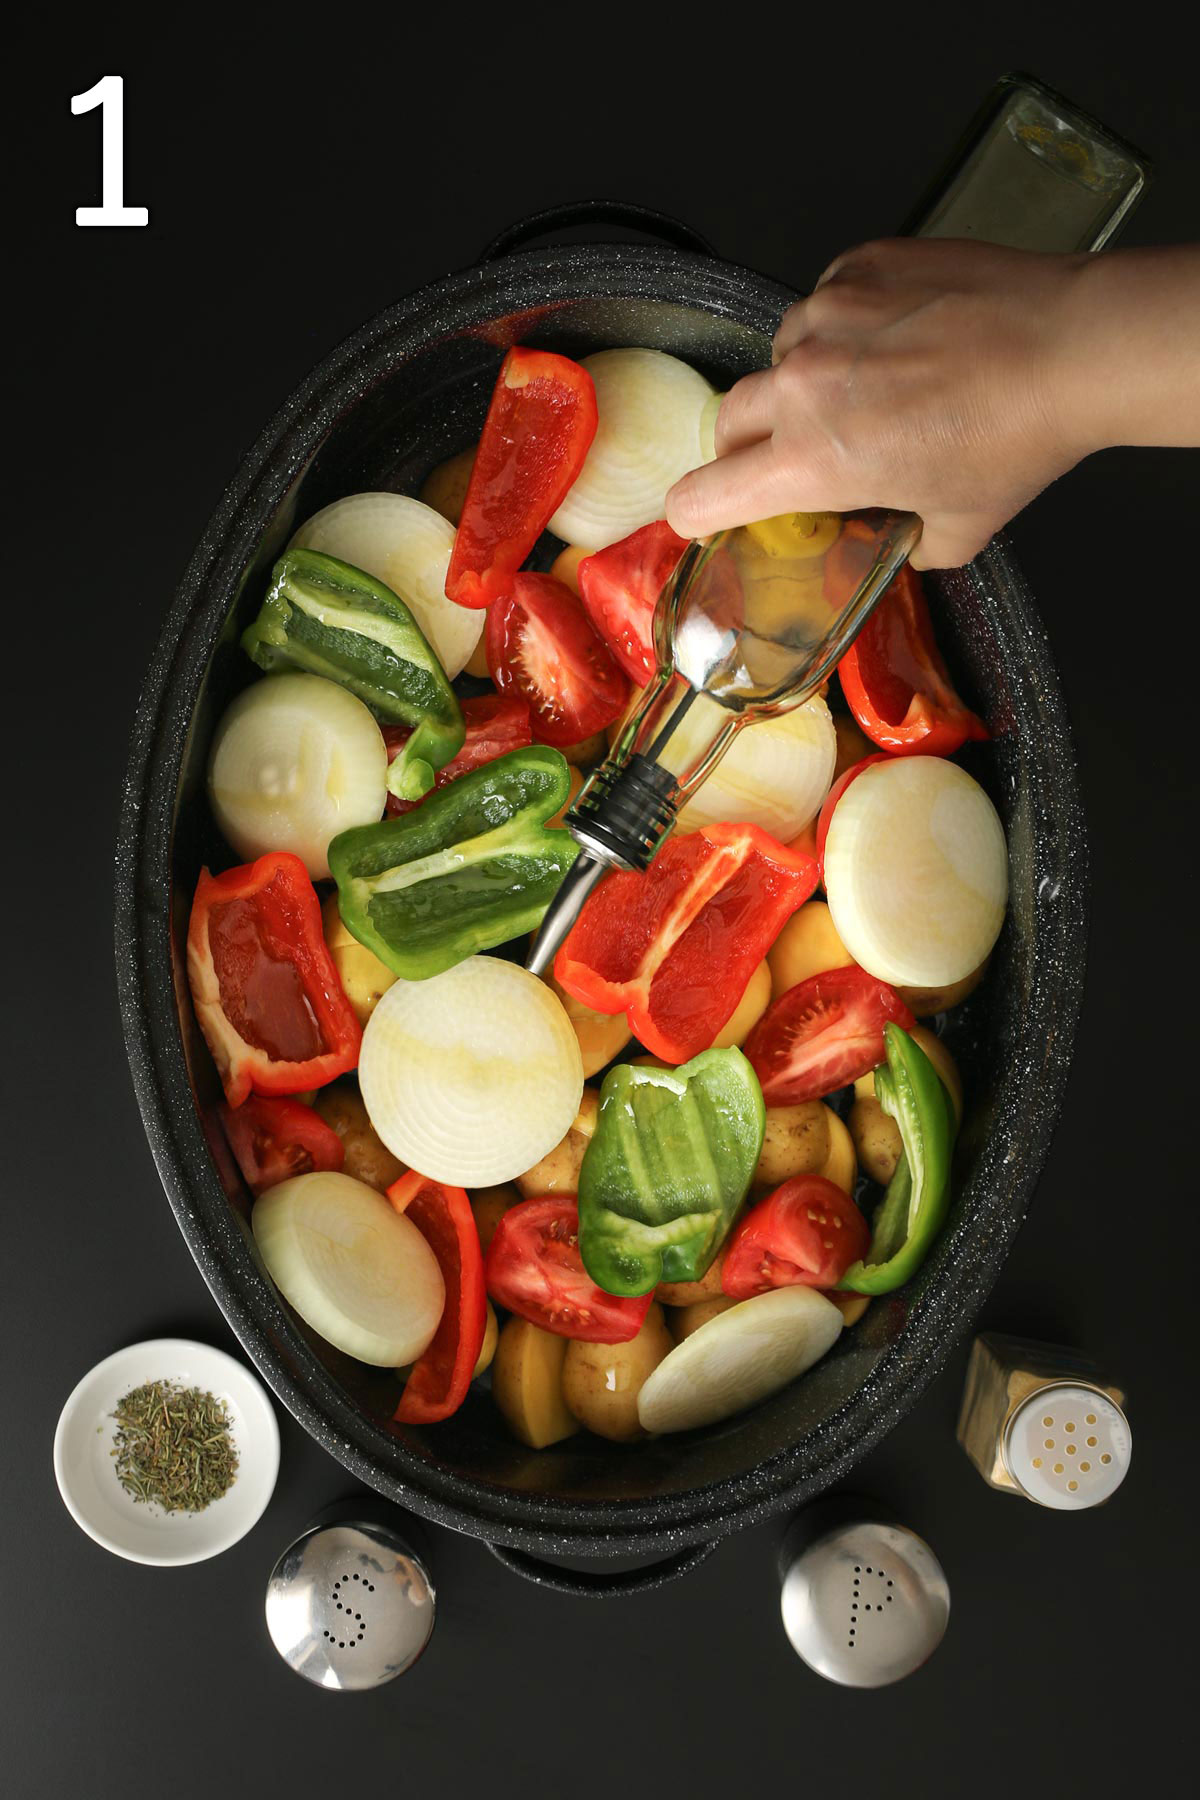 pouring oil over vegetables in large roasting pan on a table with seasonings nearby.